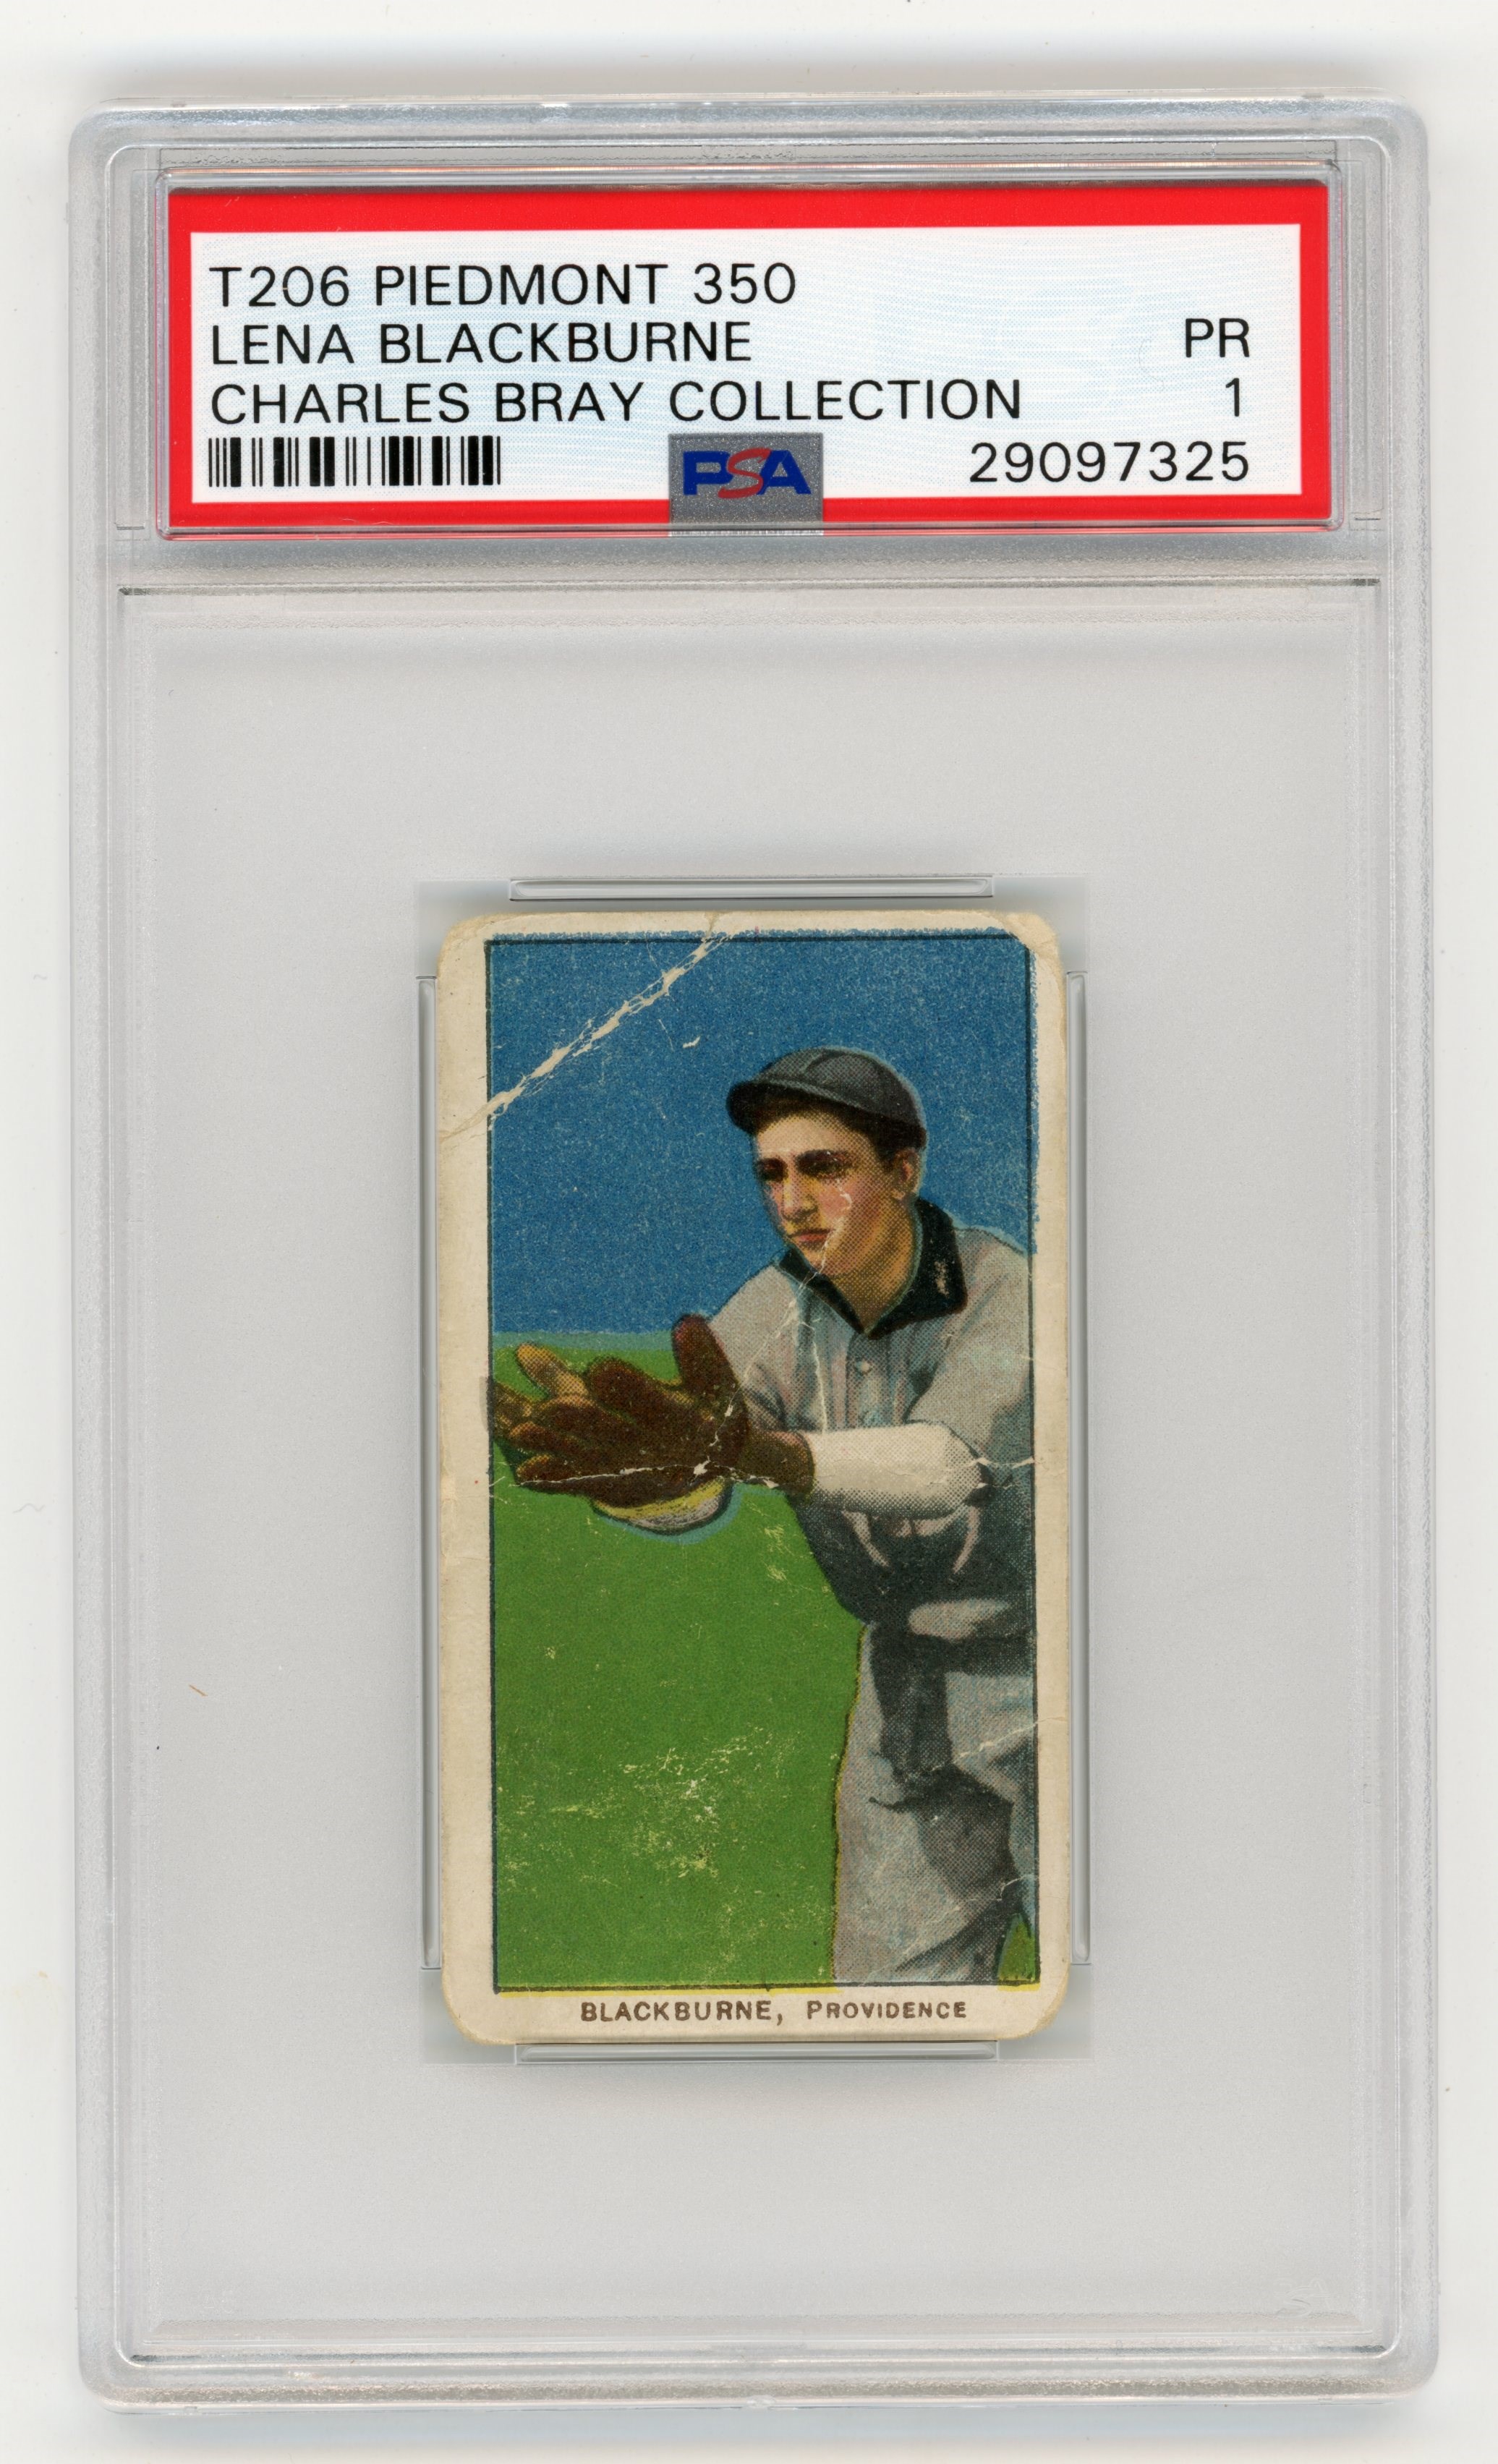 Baseball and Trading Cards - T206 Piedmont 350 Lena Blackburne PSA PR 1 From the Charles Bray Collection.